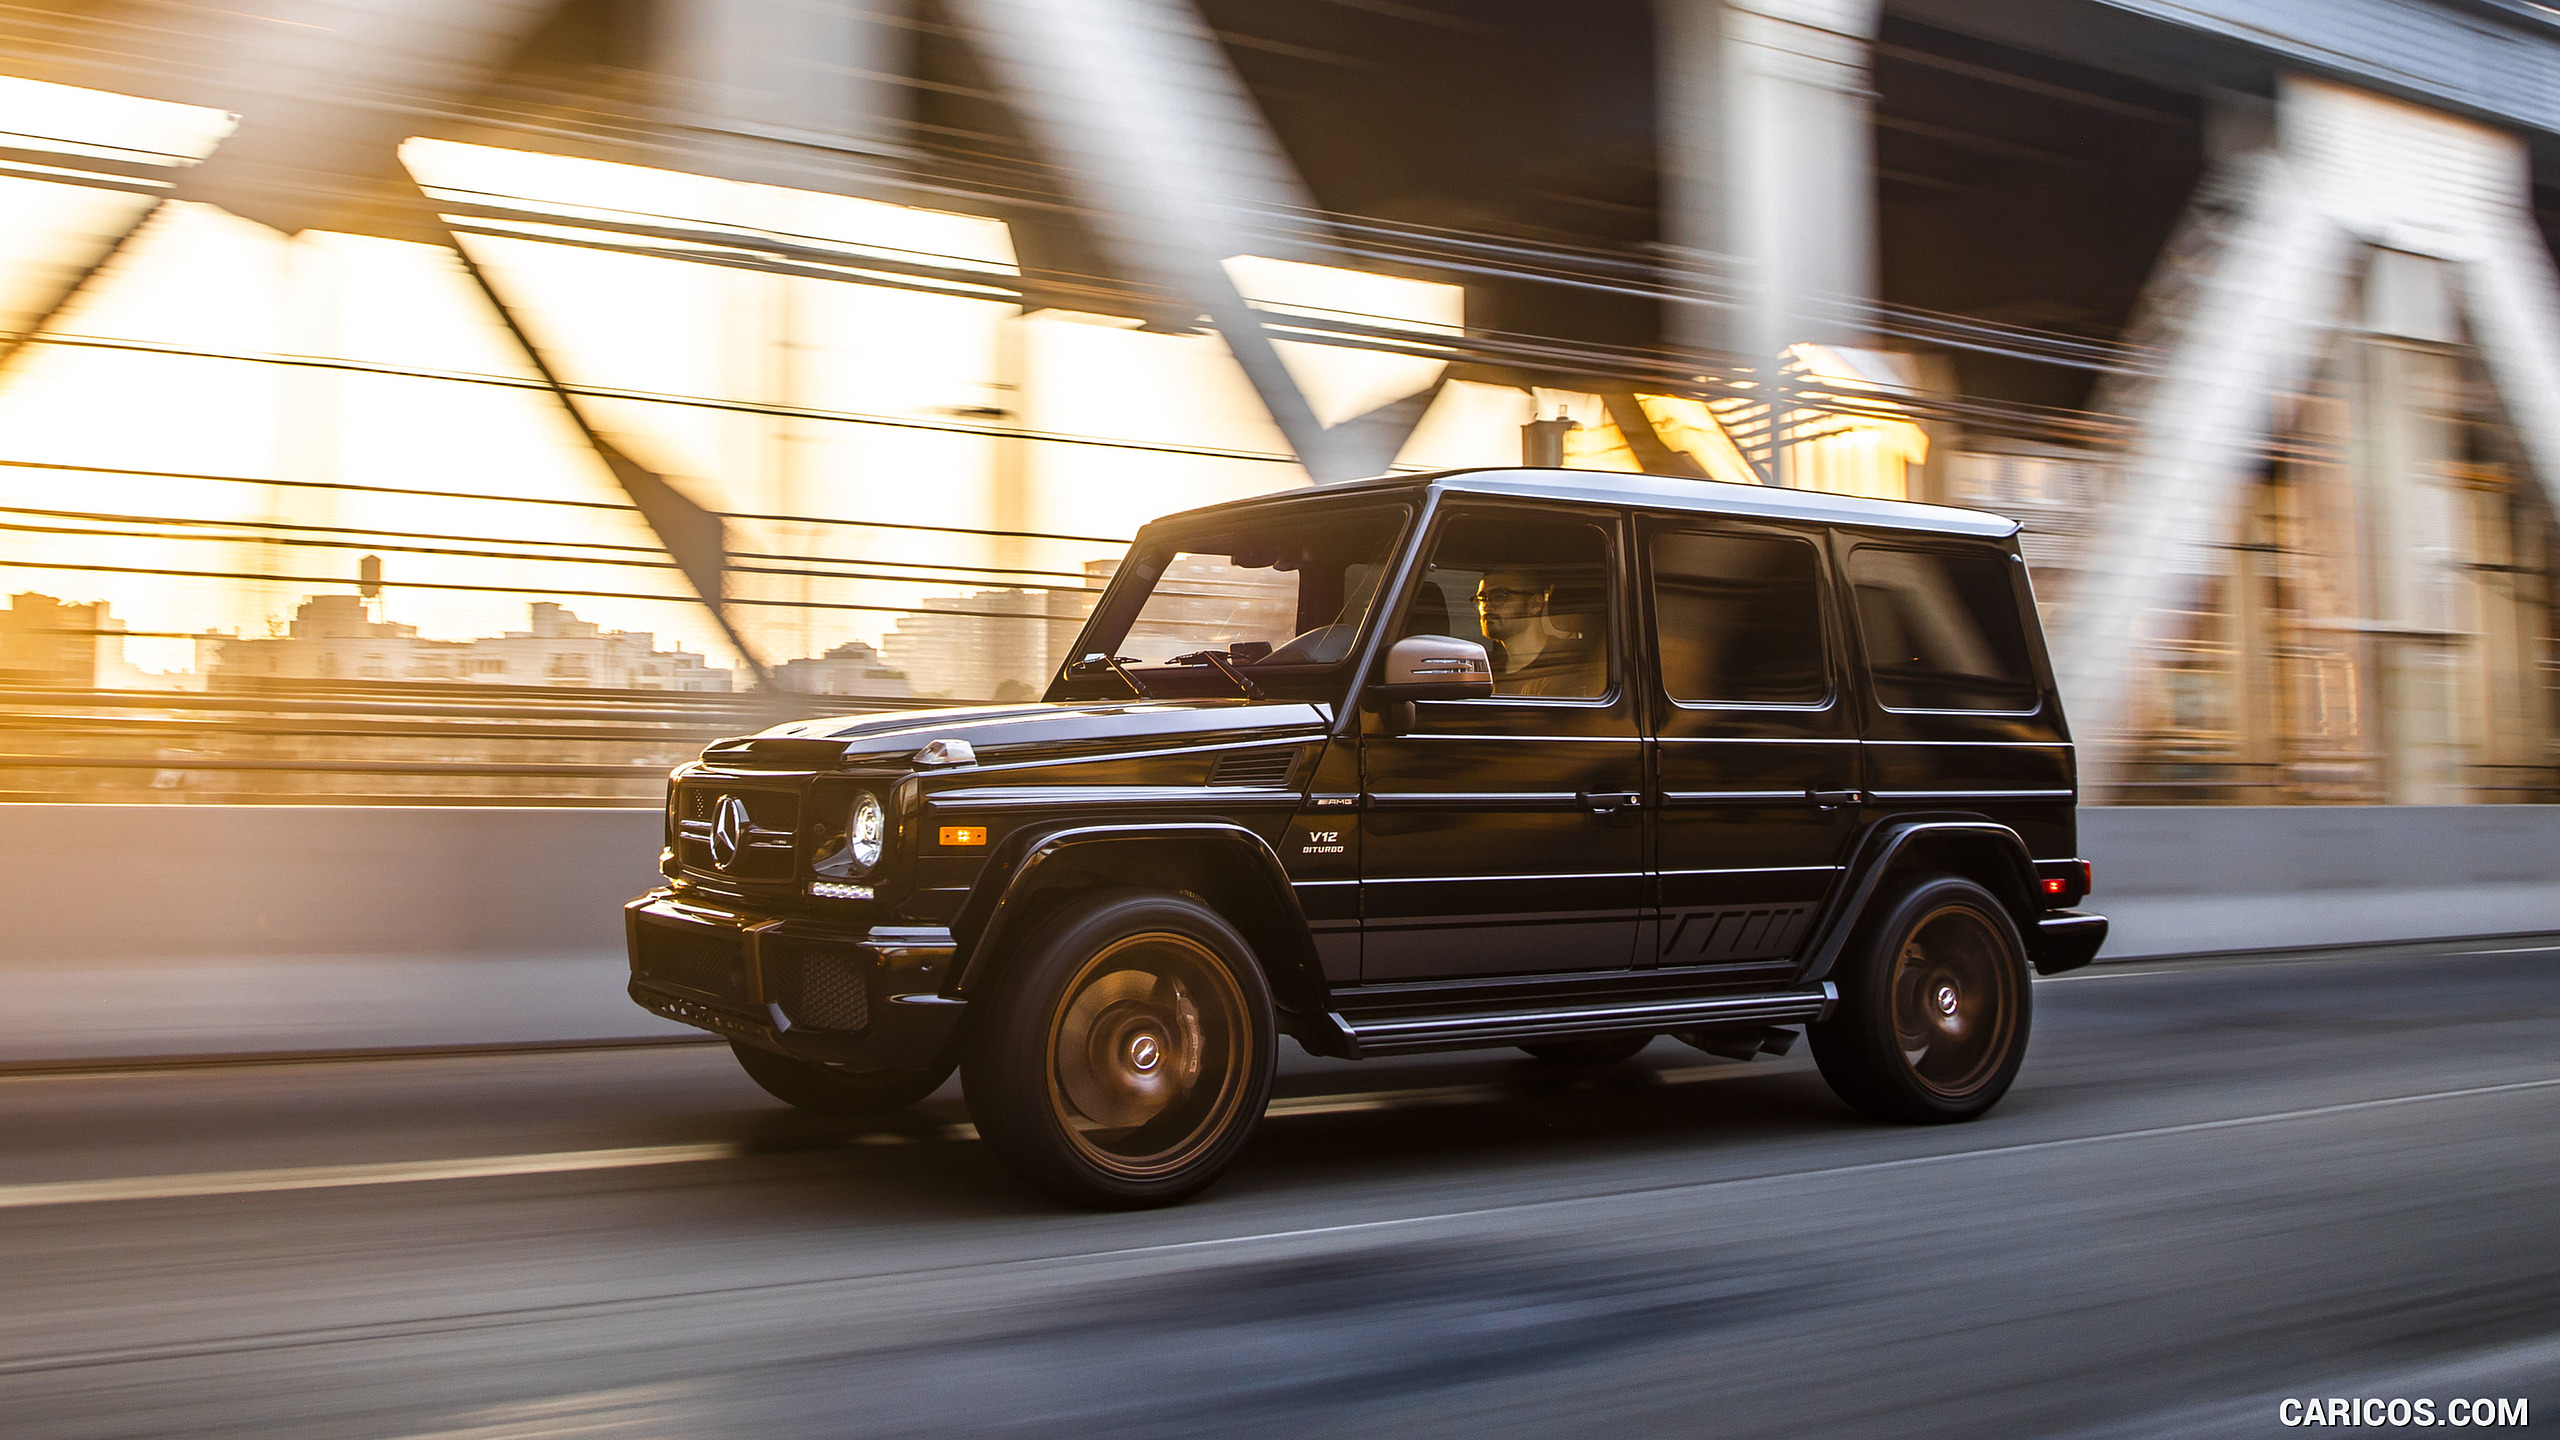 2018 Mercedes-AMG G65 Final Edition (US-Spec) - Front Three-Quarter, #11 of 70